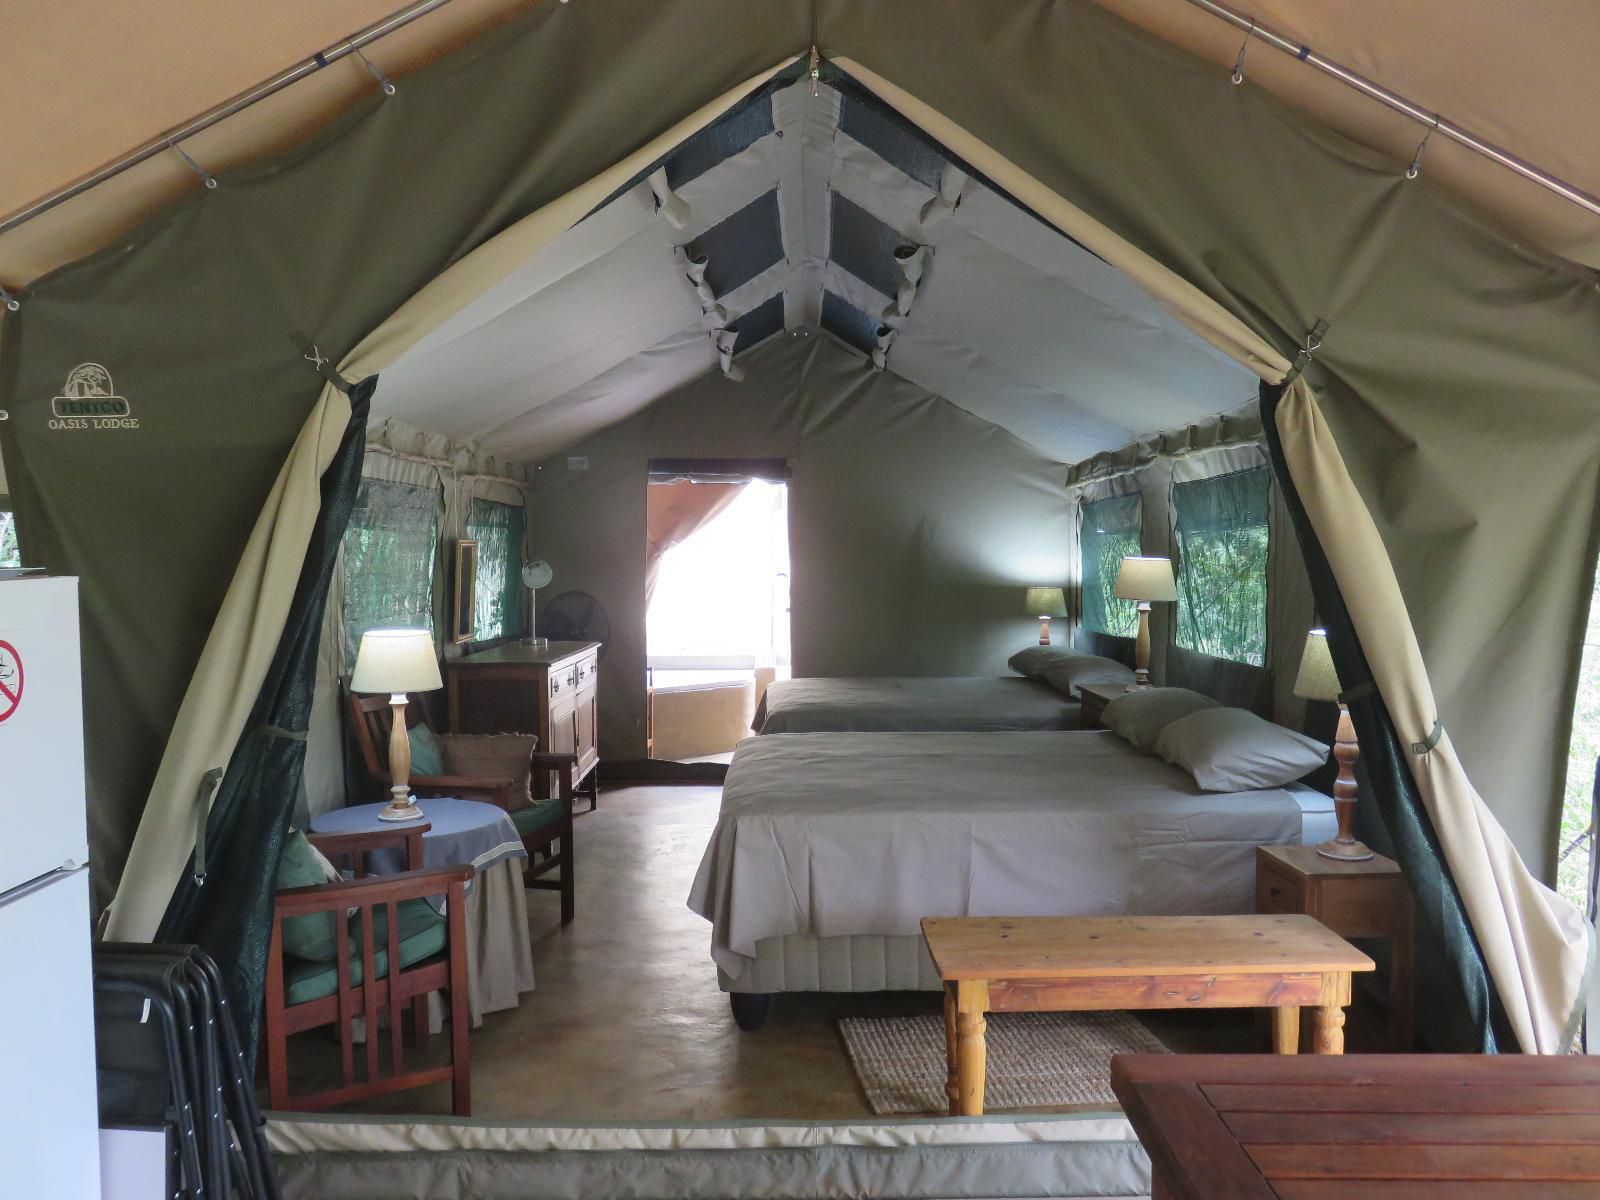 Duikerskloof Exclusive Tented Camp Buffelspoort North West Province South Africa Tent, Architecture, Bedroom